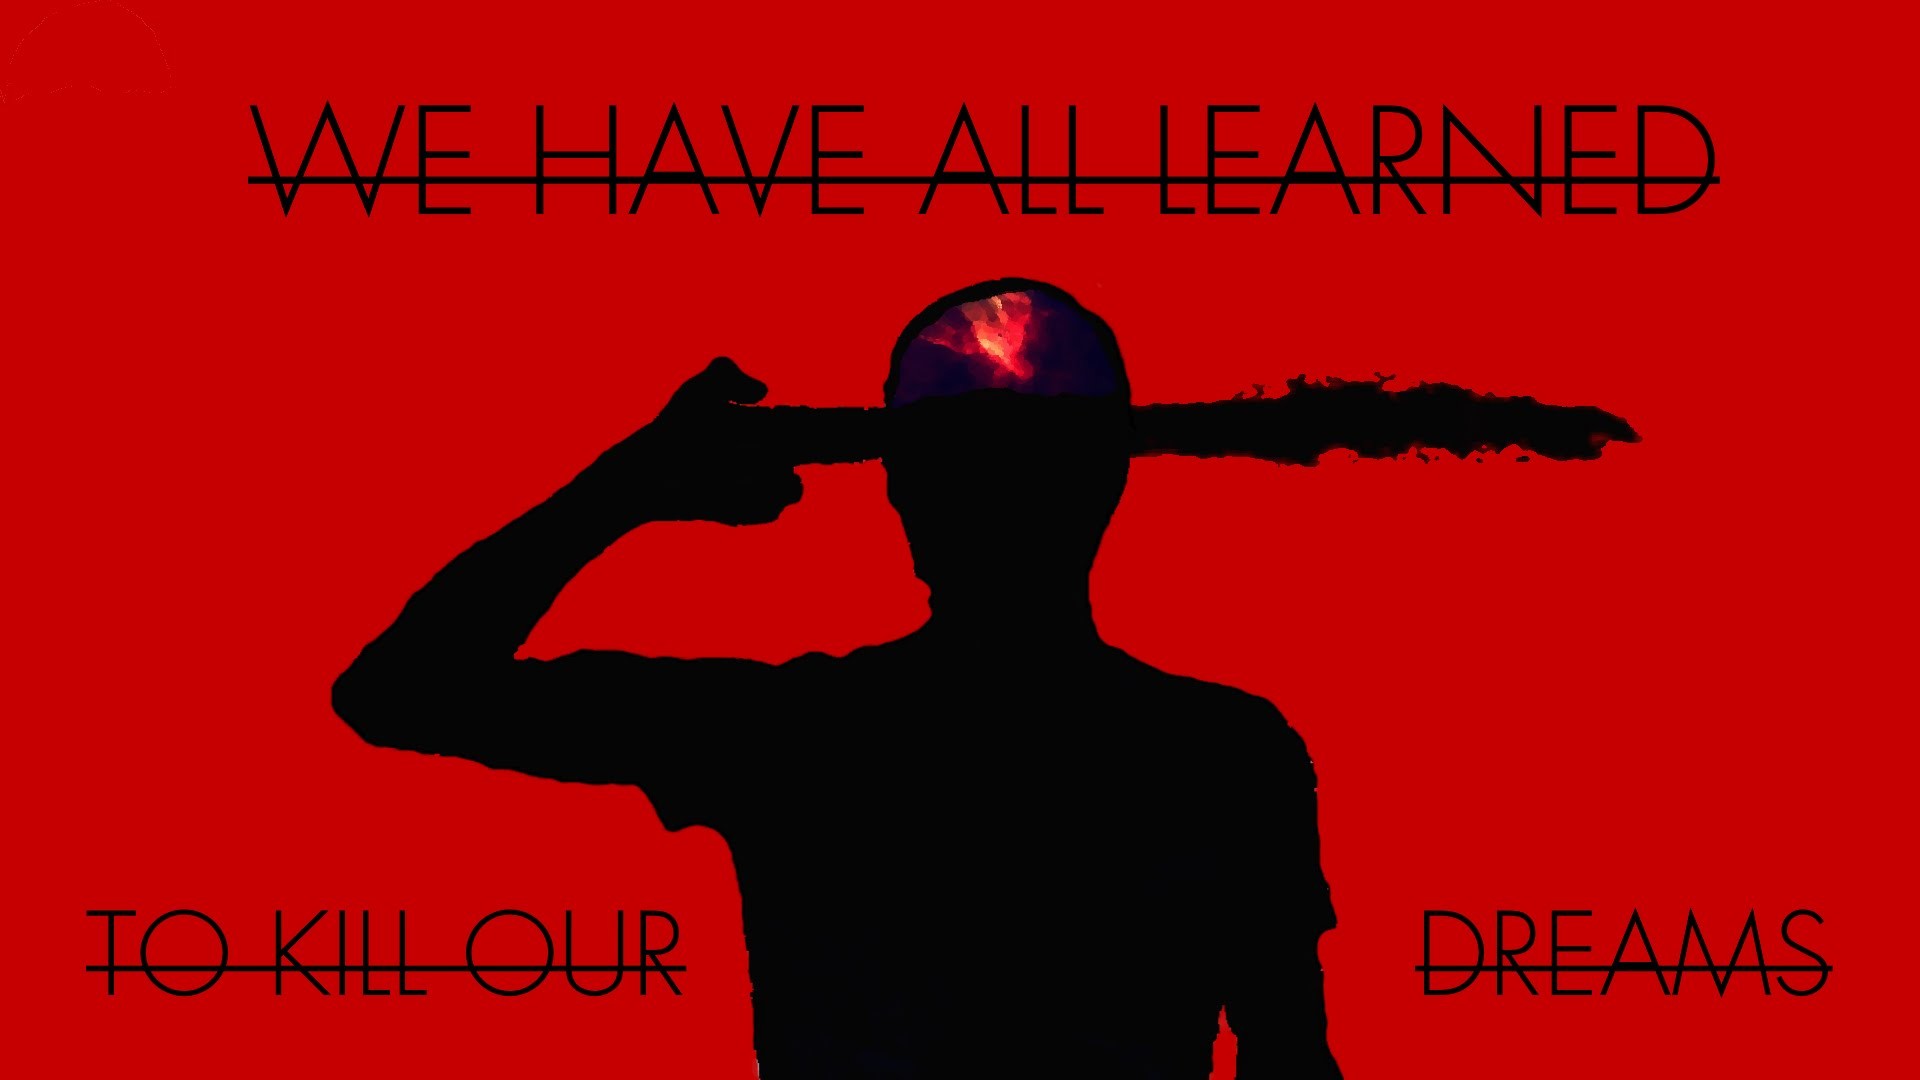 1920x1080 Twenty One Pilots "We Have All Learned To Kill Our Dreams"   Wallpaper - YouTube